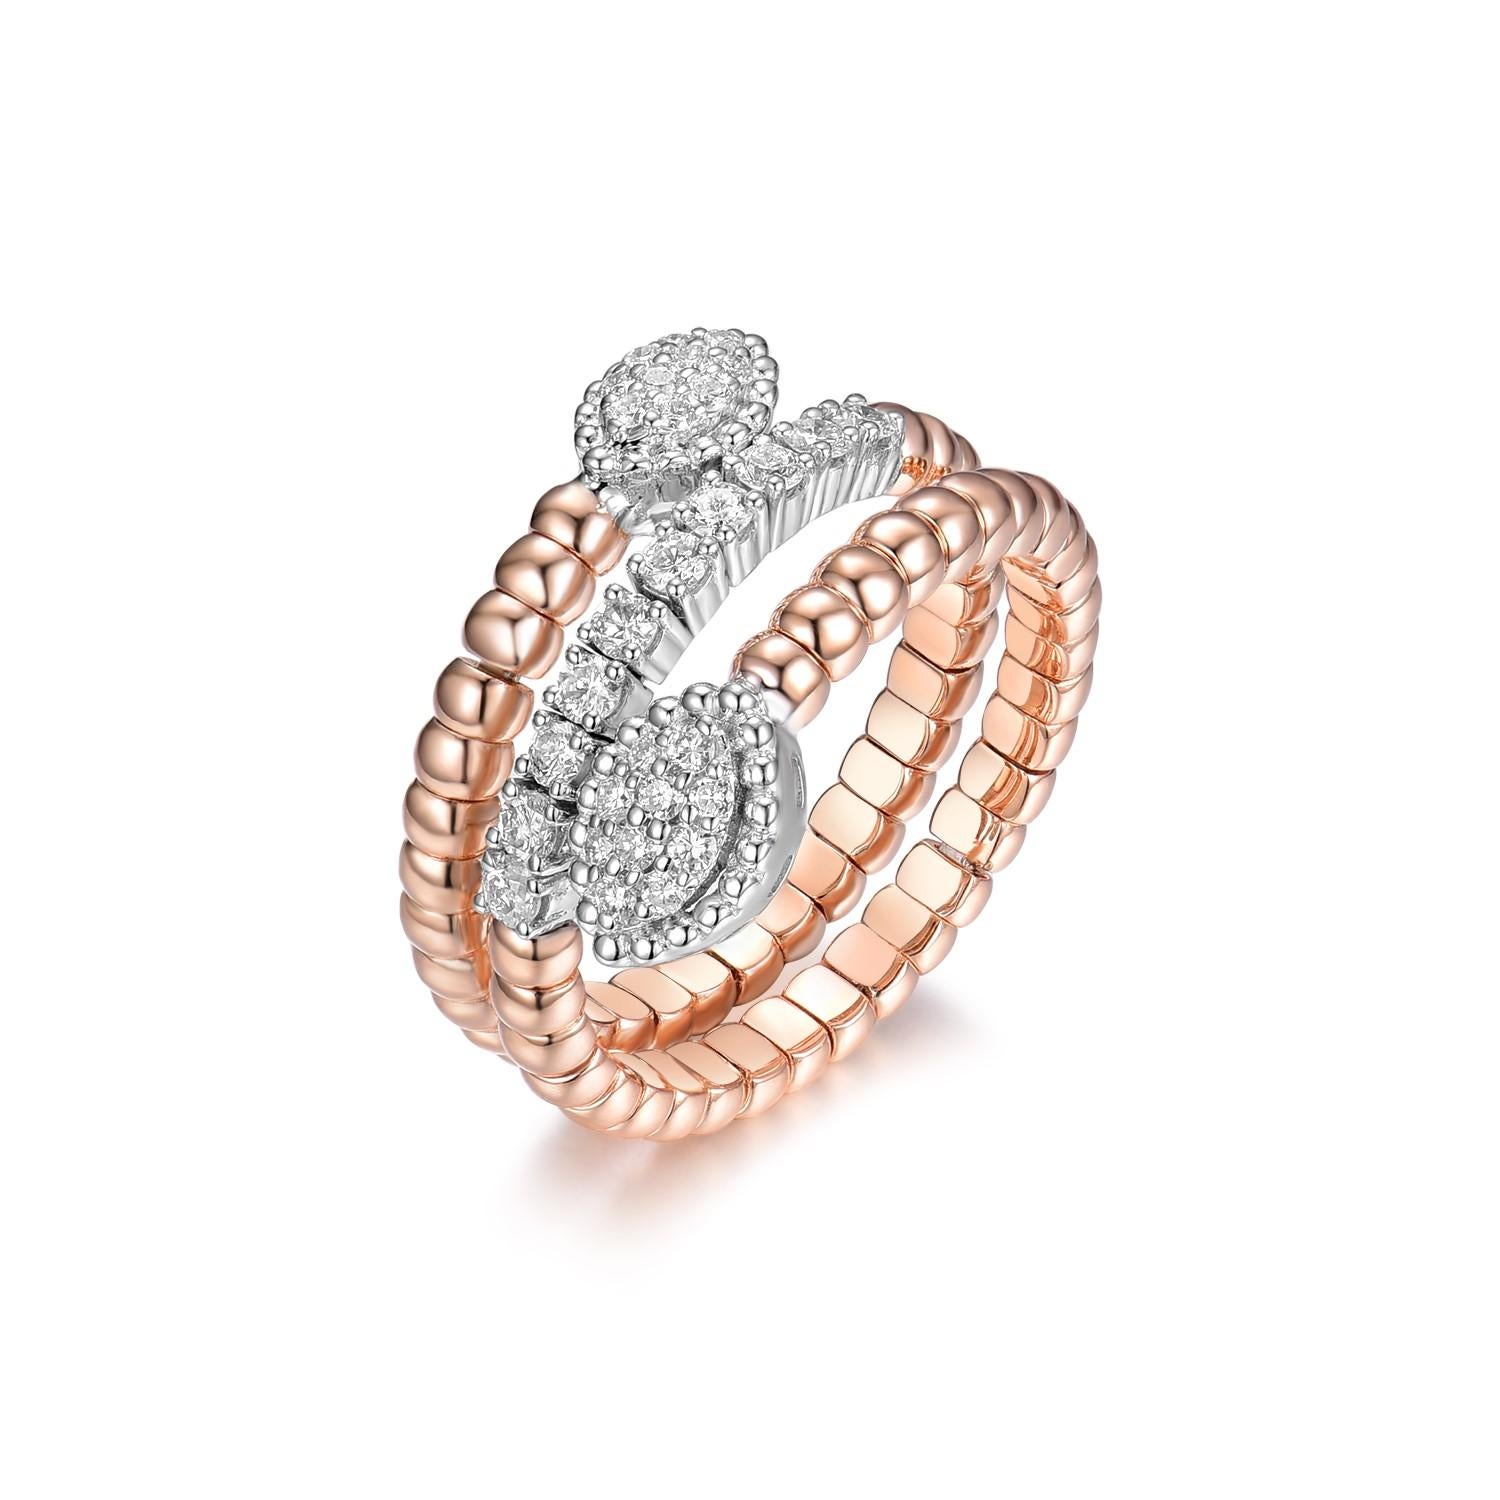 The 18K Rose and White Gold Diamond Ring is a stunning piece of jewelry that showcases a beautiful combination of rose and white gold. Crafted with meticulous attention to detail, this ring features 30 dazzling diamonds with a total weight of 0.48